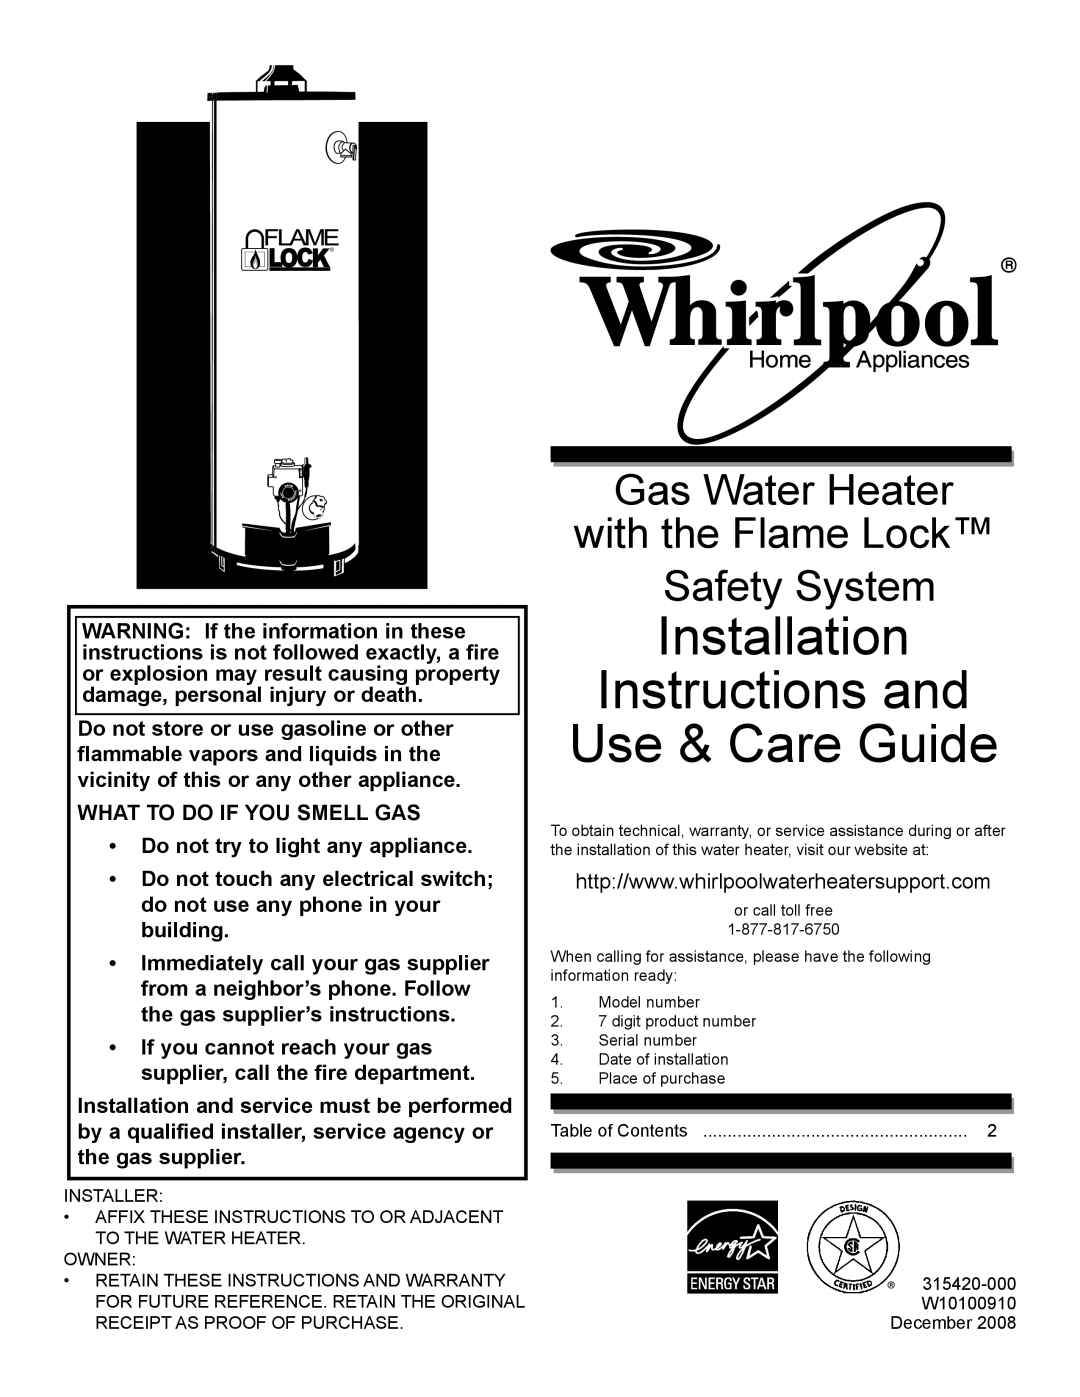 Whirlpool W10100910, 315420-000 warranty Installation Instructions Use & Care Guide 